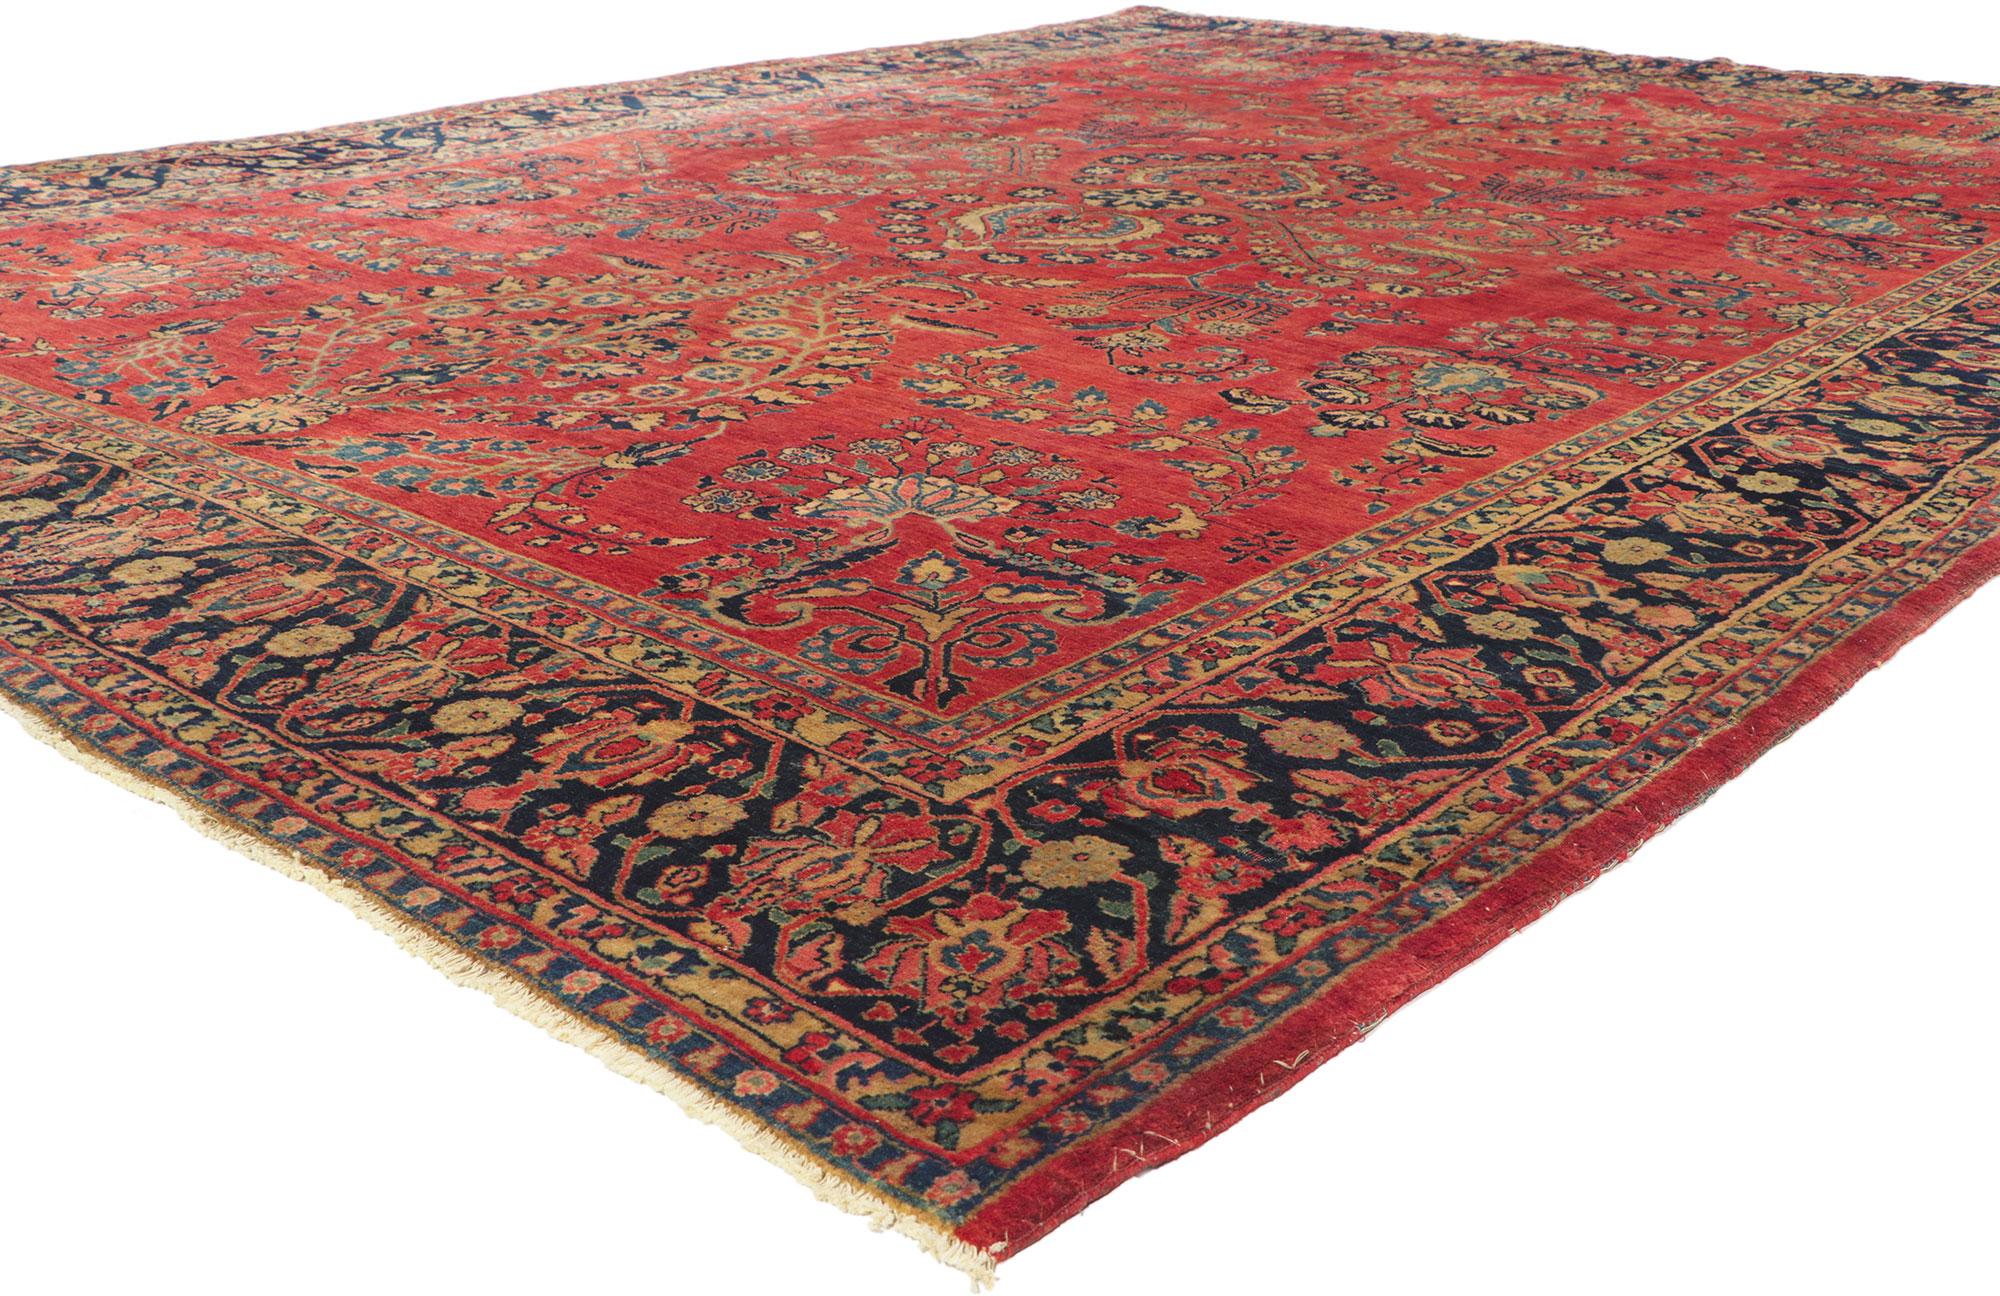 78525 Antique Persian Mohajeran Sarouk Rug, 08'09 x 11'09. Emating traditional style with incredible detail and texture, this hand knotted antique Persian Mohajeran Sarouk rug is a captivating vision of woven beauty. The timeless design and rich